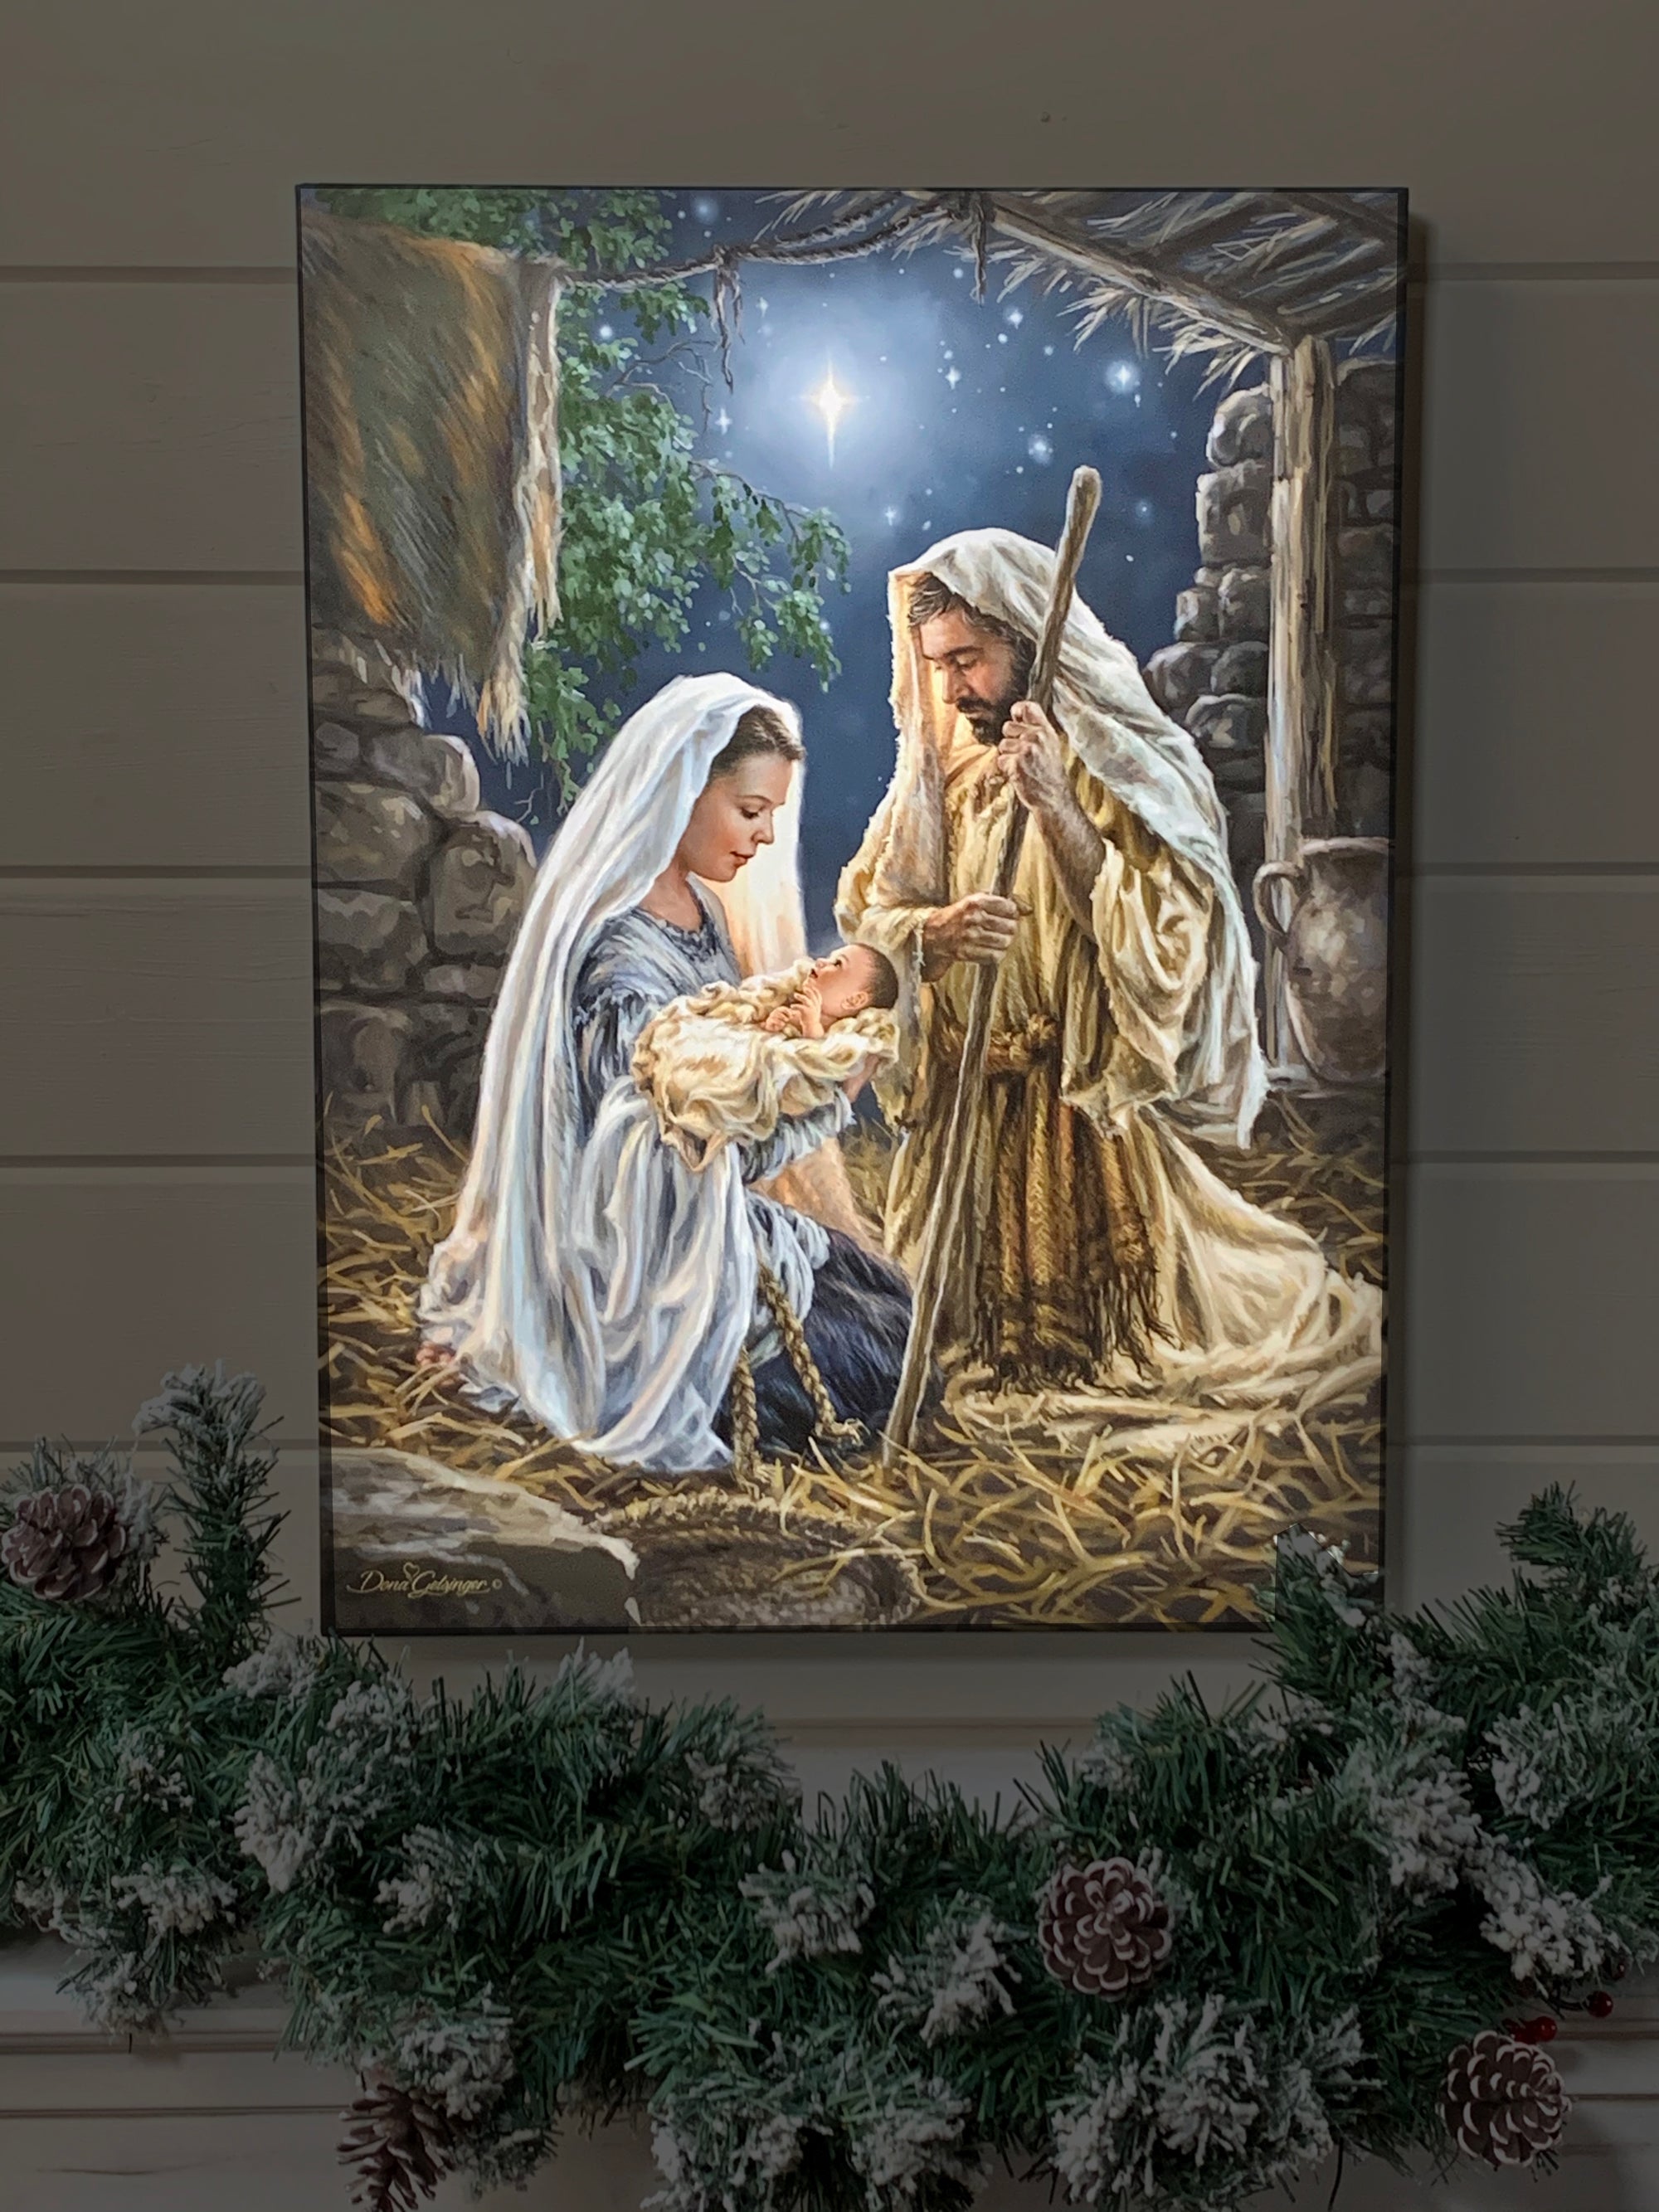 Born In A Manger 18x24 Fully Illuminated LED Art. The nativity with Joseph, Mary, and Jesus staged in a dark room.